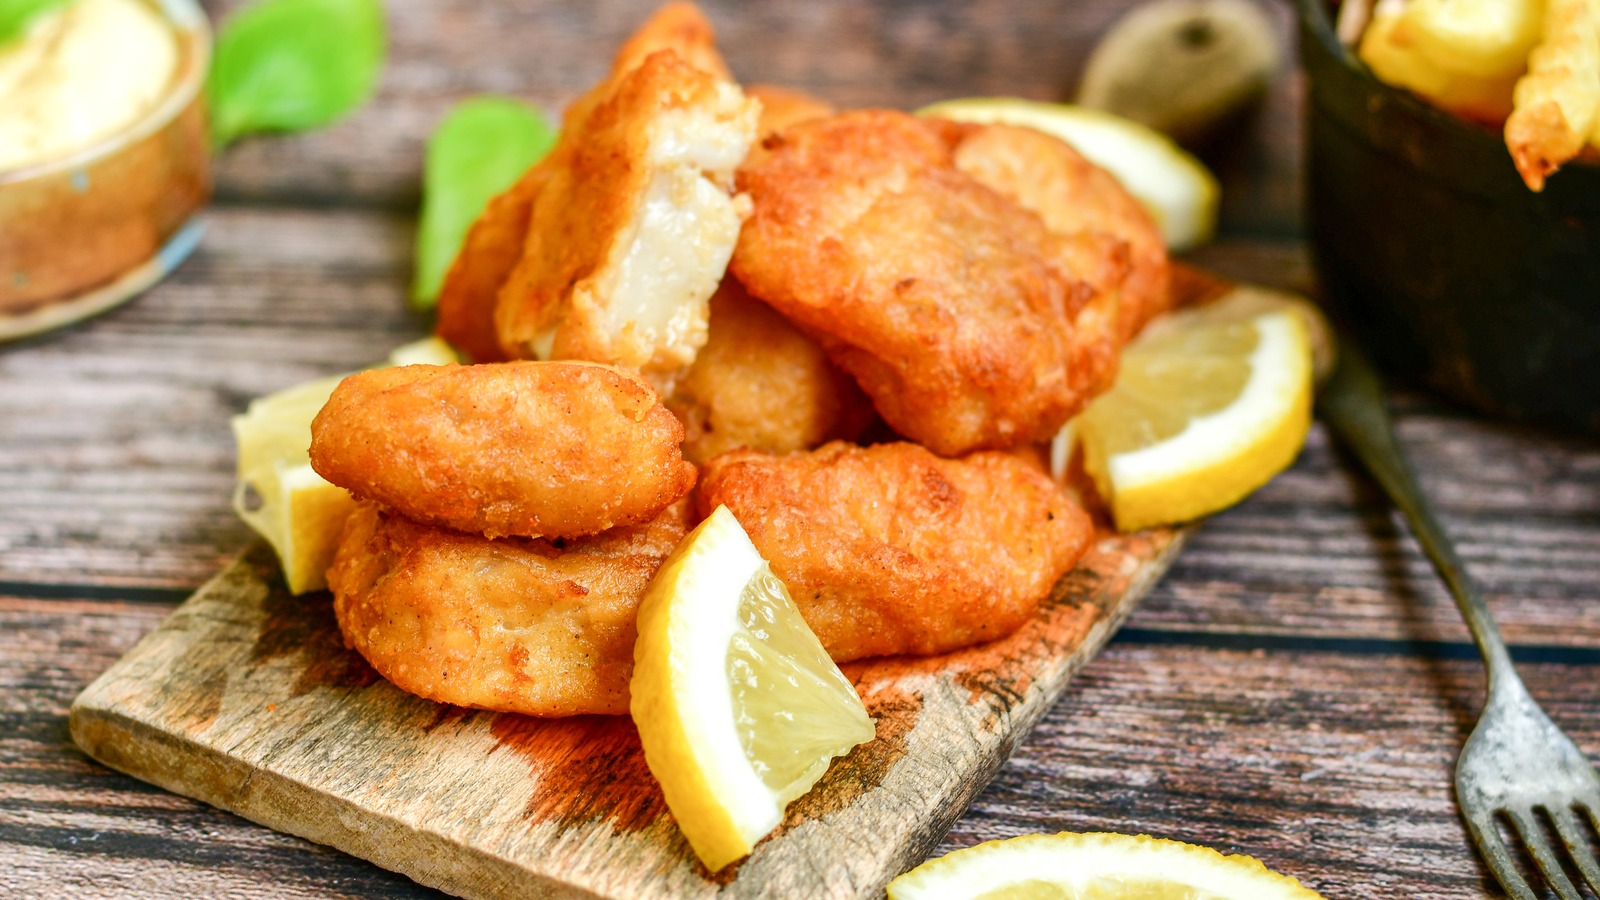 https://www.thedailymeal.com/img/gallery/the-best-types-of-fish-for-deep-frying/l-intro-1682967511.jpg